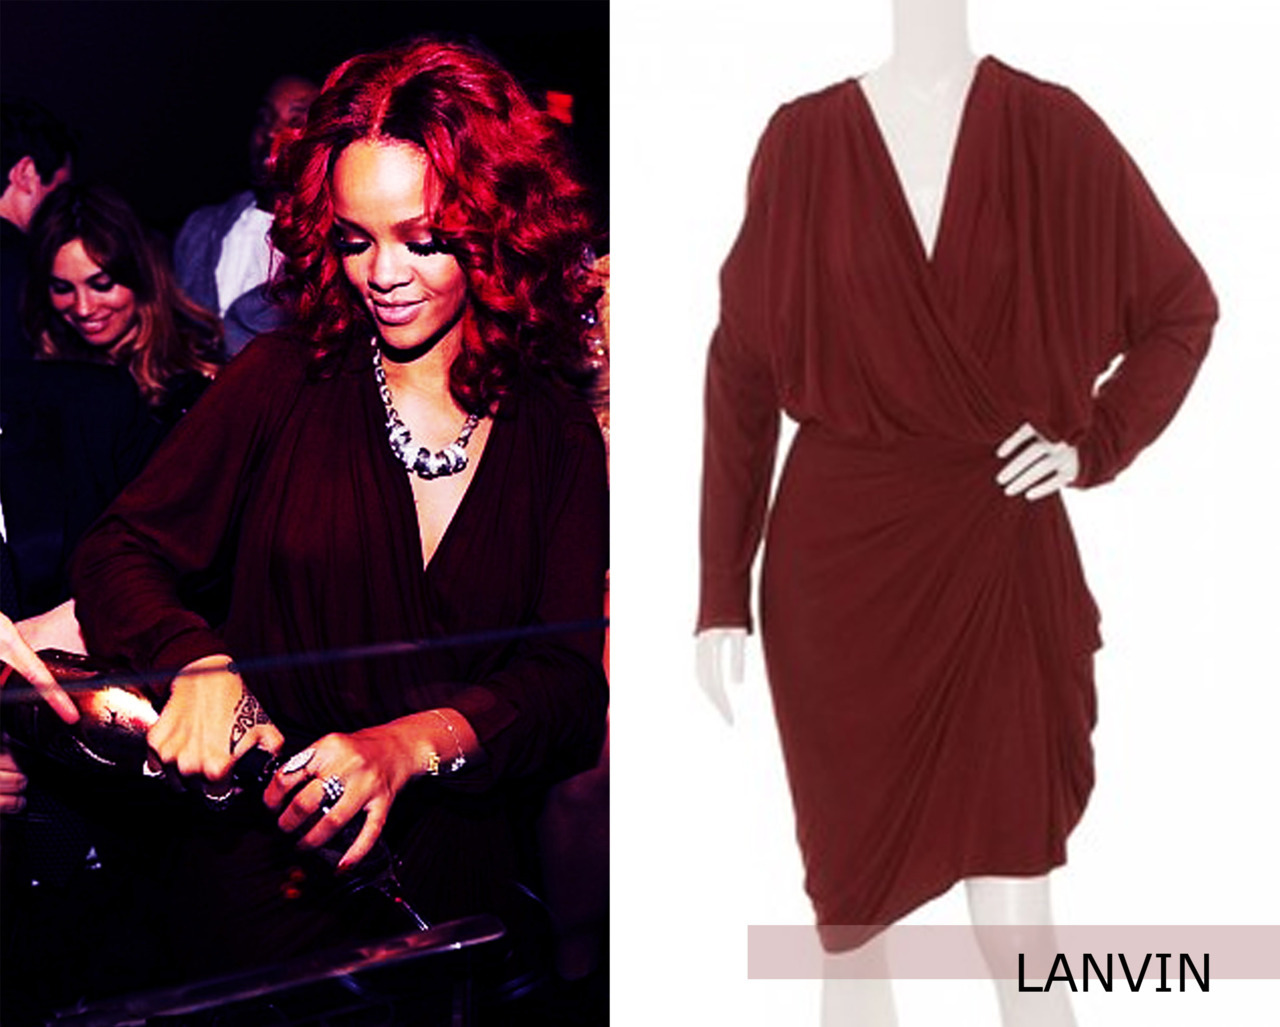 During NYE Rihanna was seen in a Lanvin Brown draped dress. Much better than the other dress she wore.